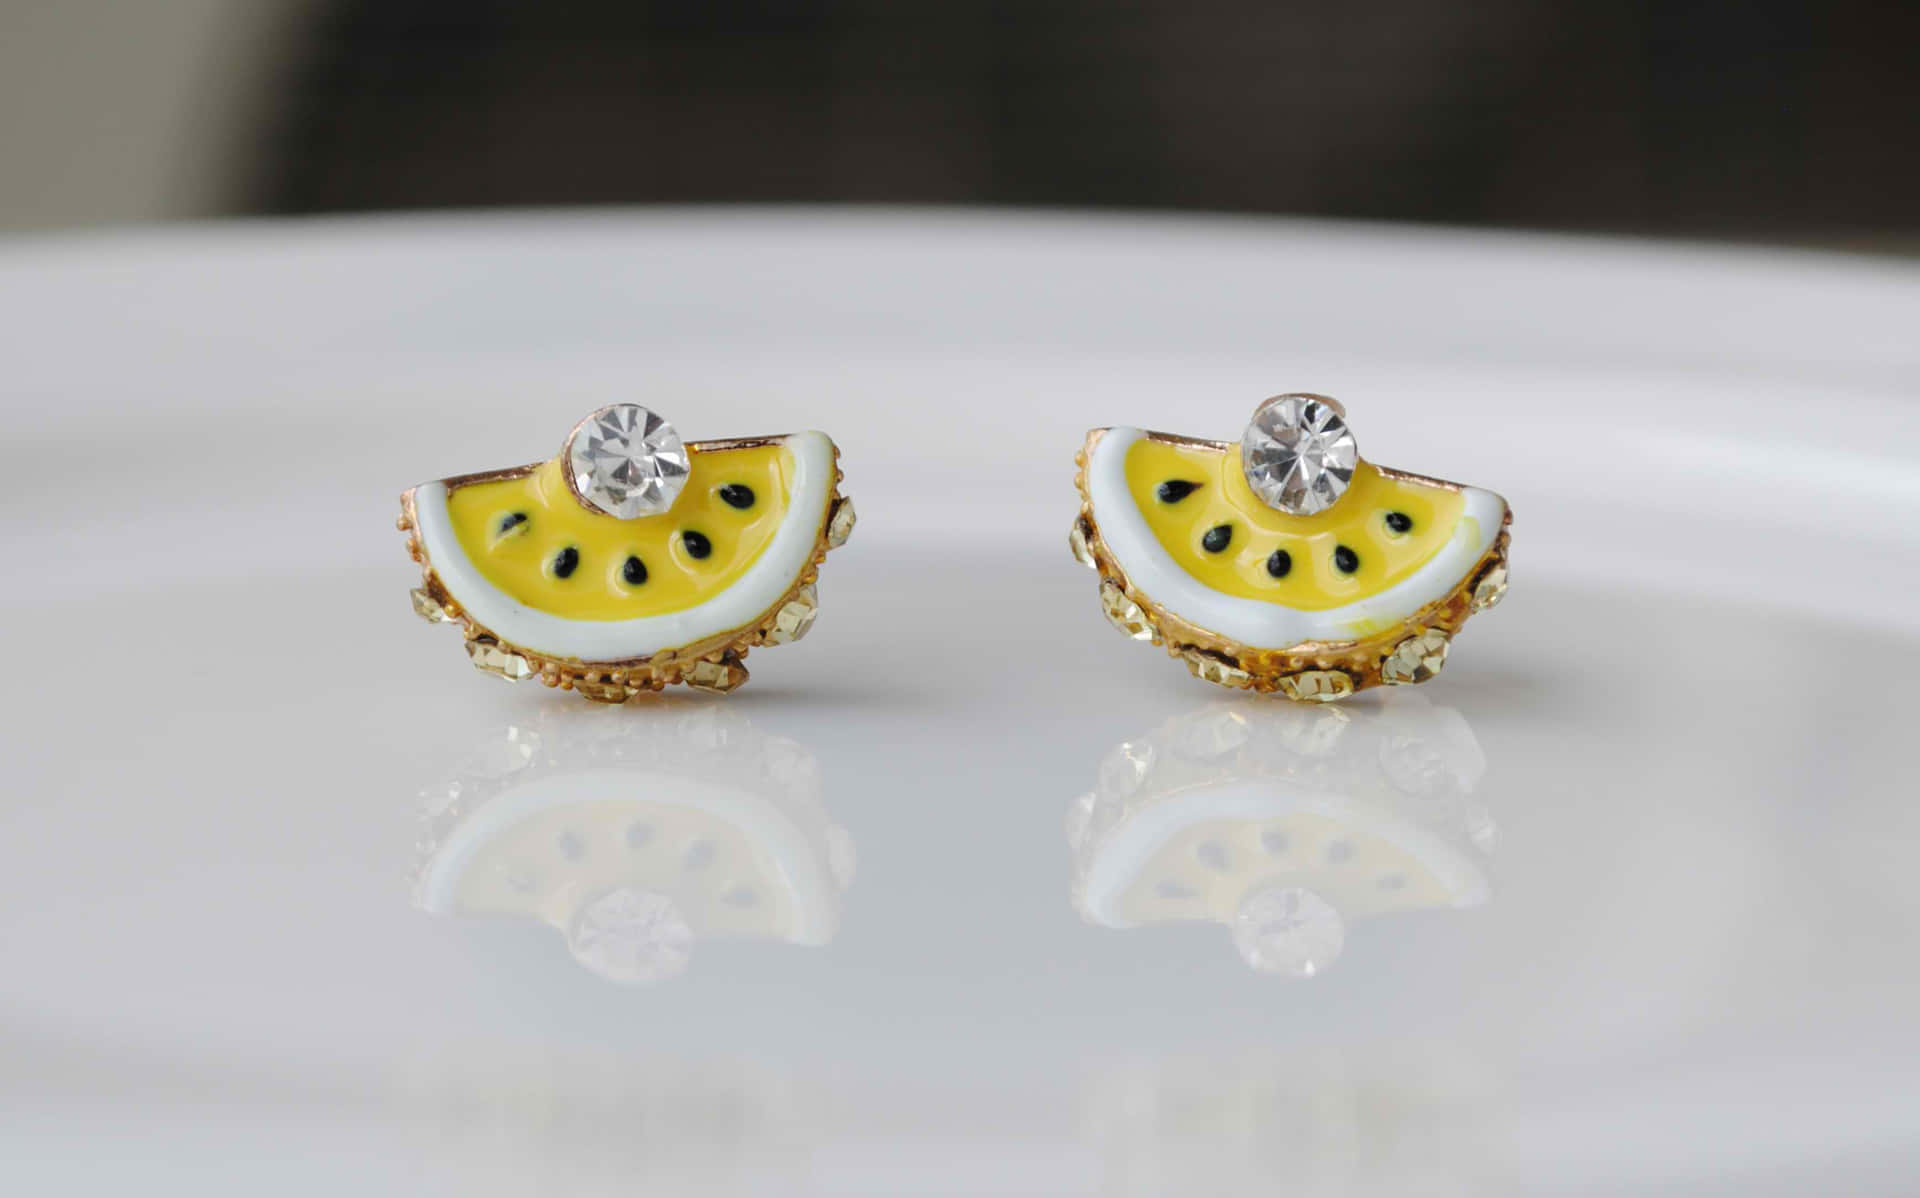 A Pair Of Yellow And White Sliced Watermelon Earrings